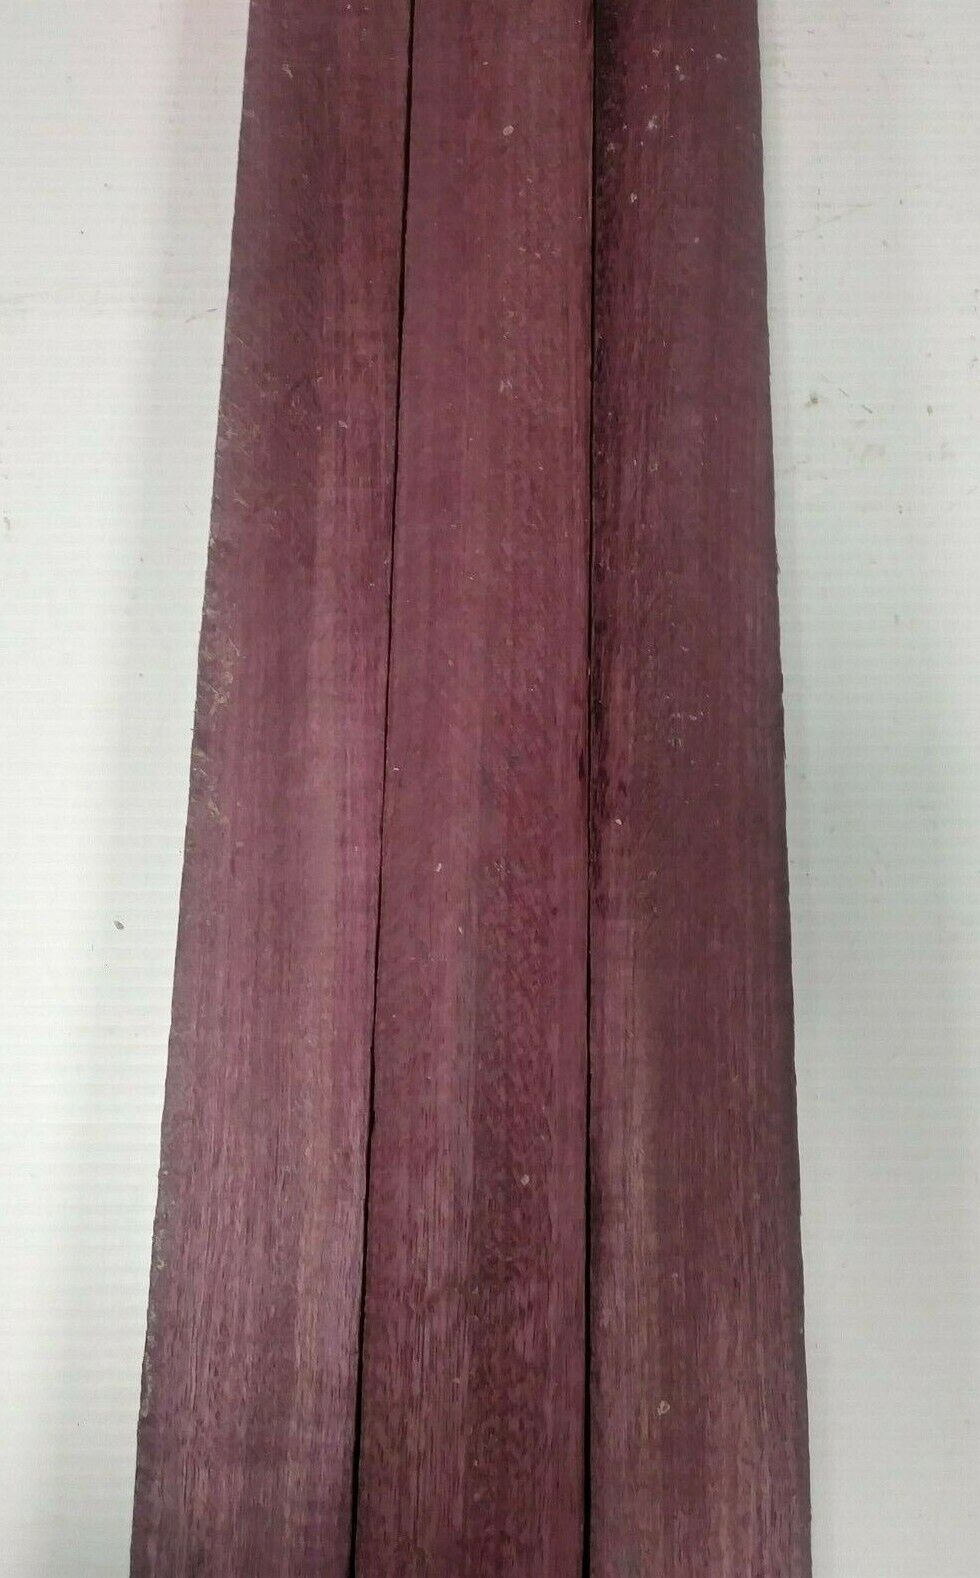 Pack of 3, Purpleheart Thin Dimensional Lumber Board Wood Blank 3/4" x 2" x 16" EXOTIC WOOD ZONE Does Not Apply - фотография #3